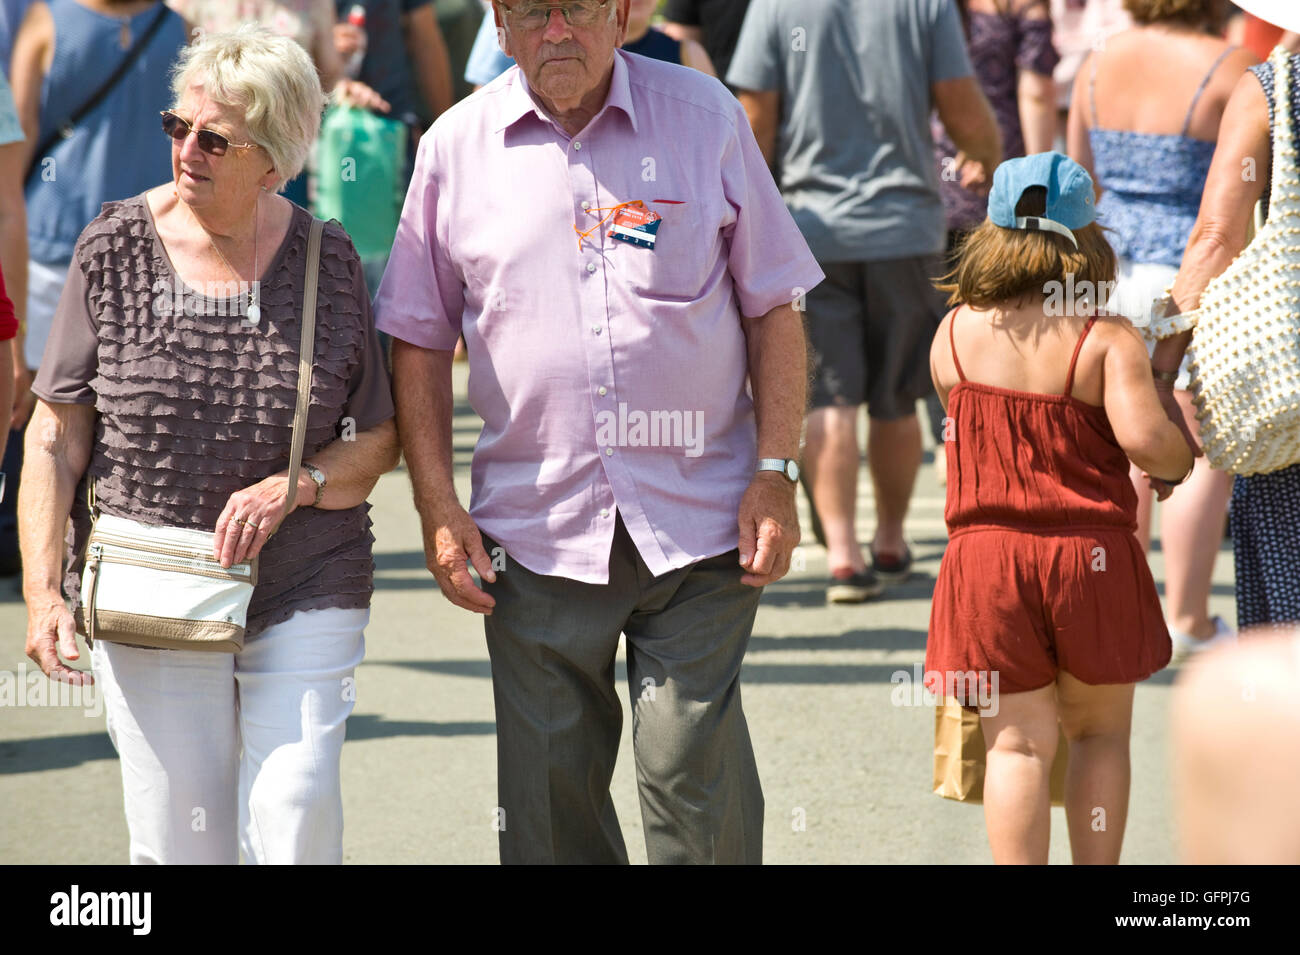 Old and young visitors to the Royal Welsh Show, Royal Welsh Showground, Llanelwedd, Builth Wells, Powys, Wales, UK Stock Photo